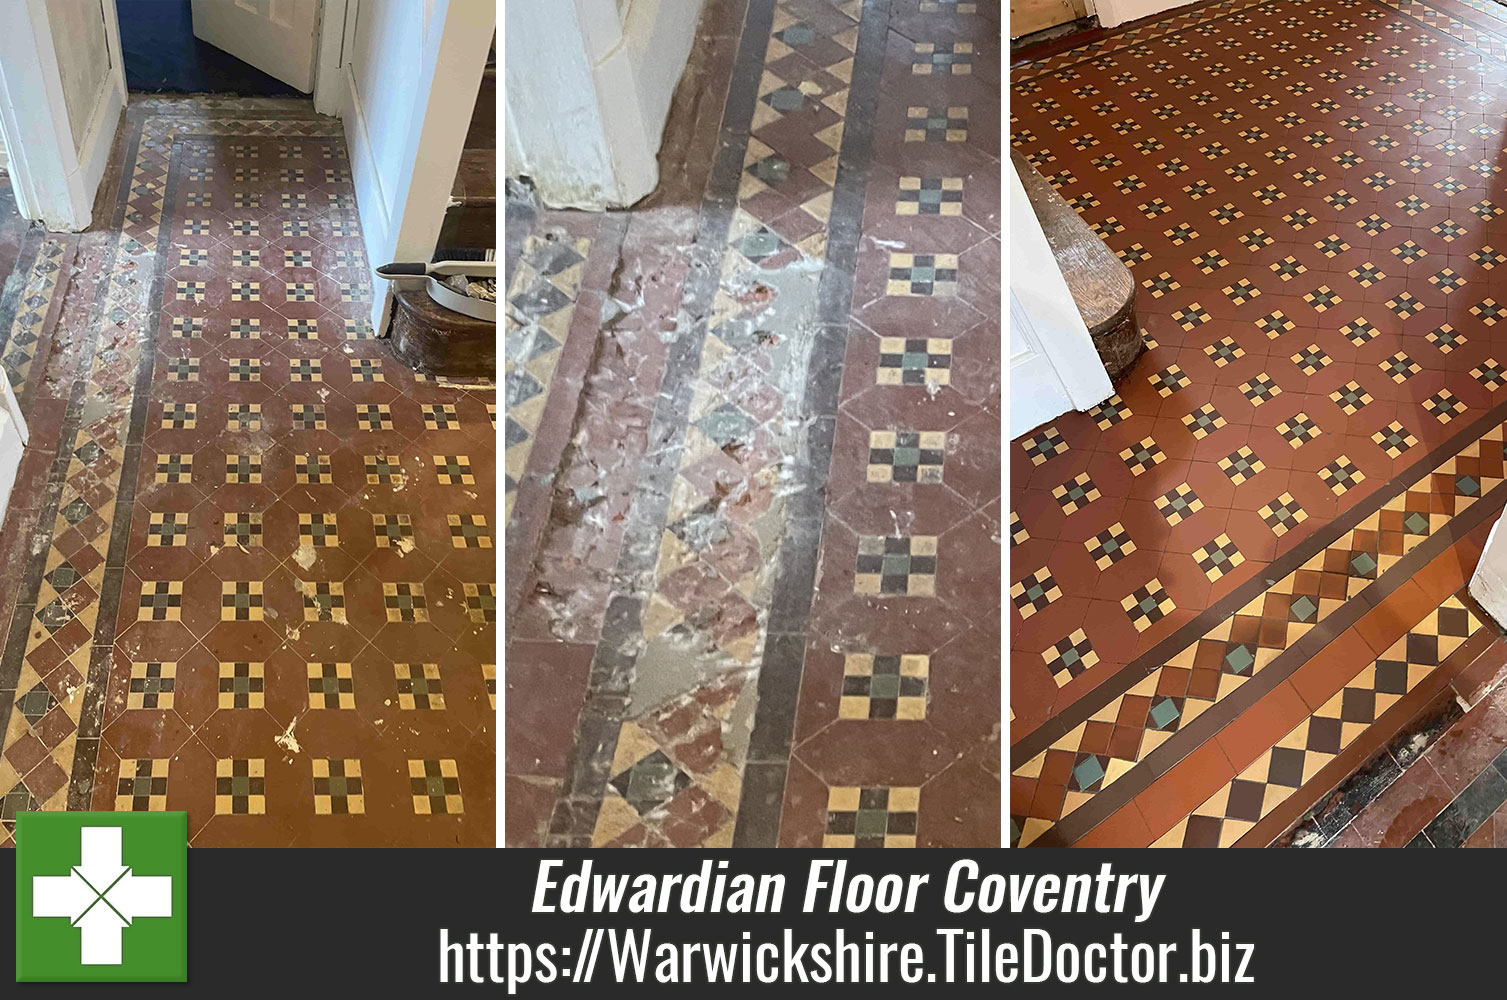 Oxy-Gel and Acid-Gel used to Conduct the Low Moisture Renovation of an Edwardian Tiled Hallway Floor in Coventry